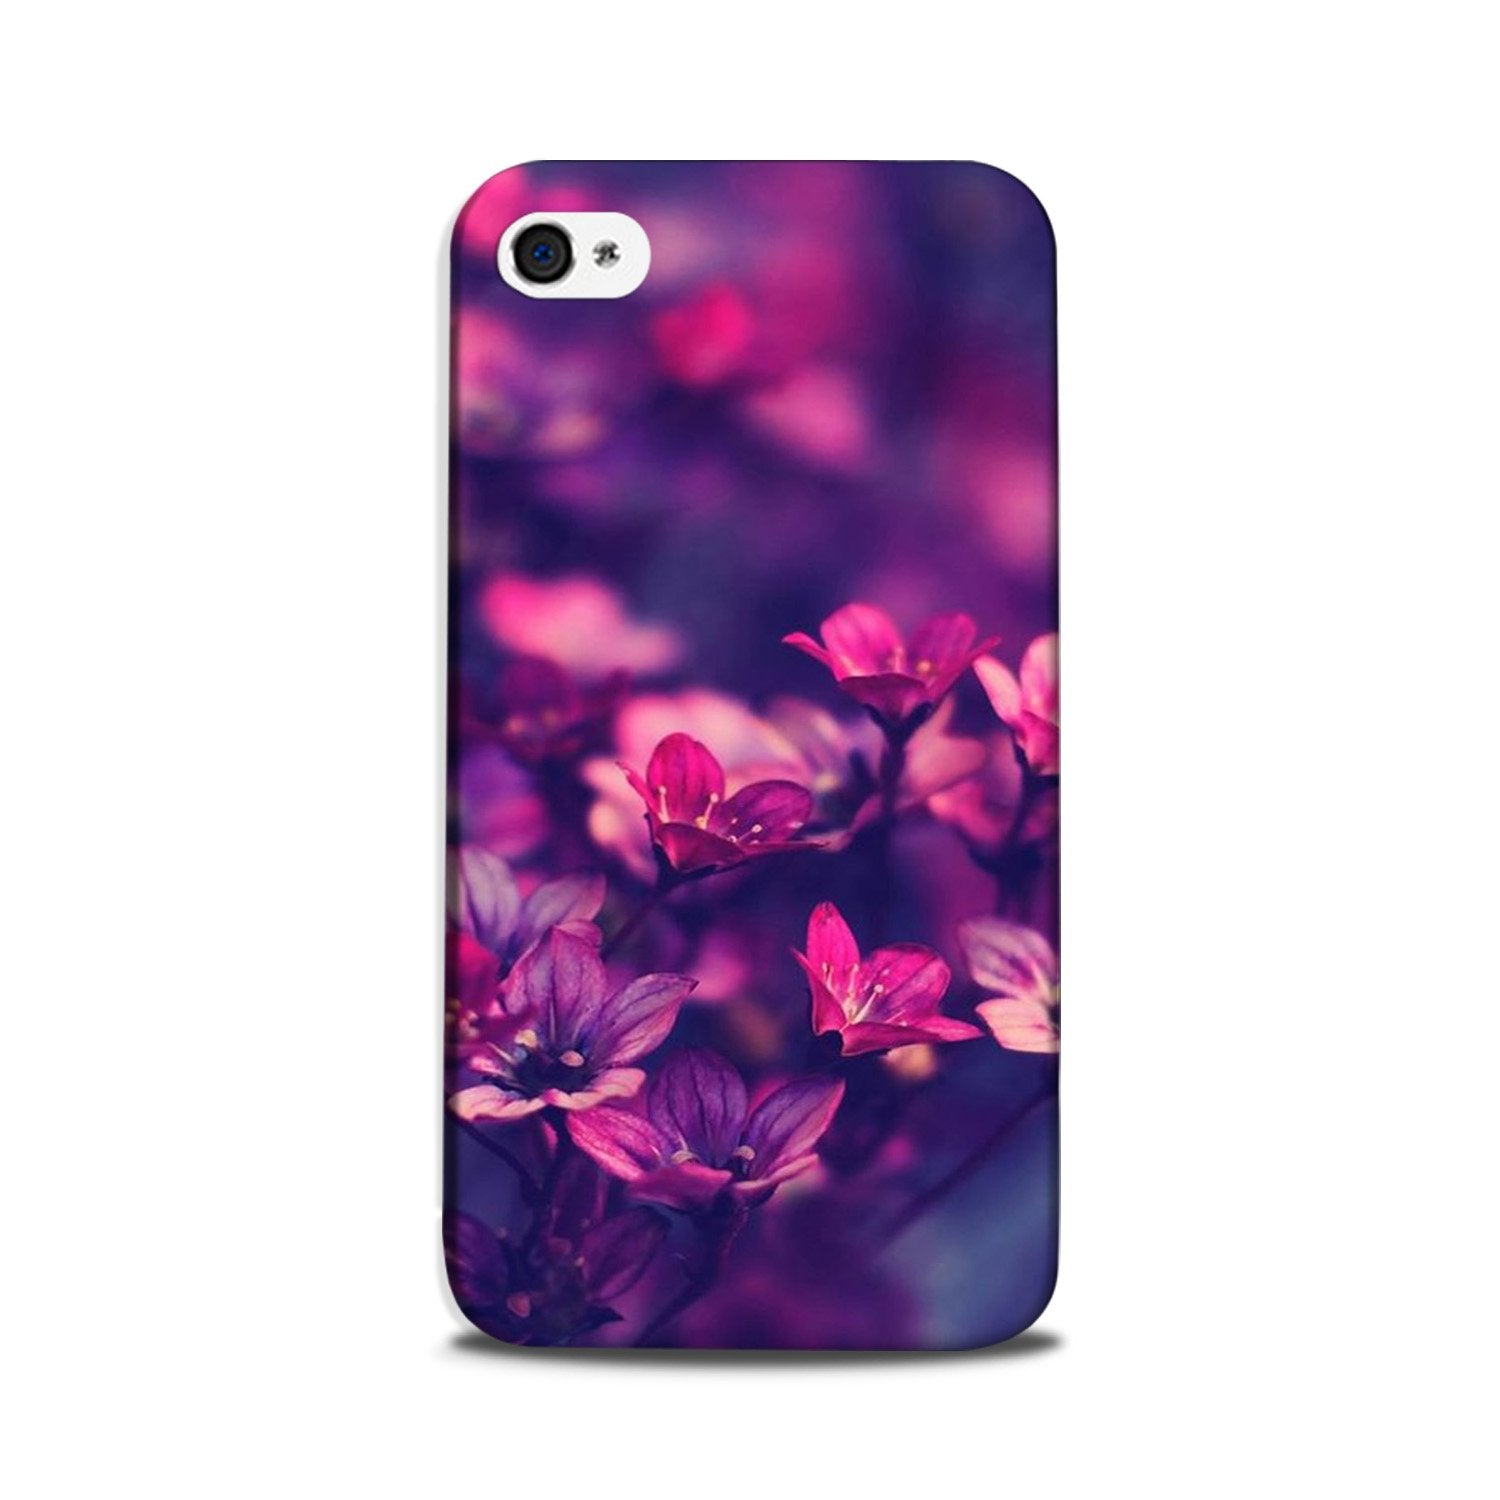 flowers Case for iPhone 5/ 5s